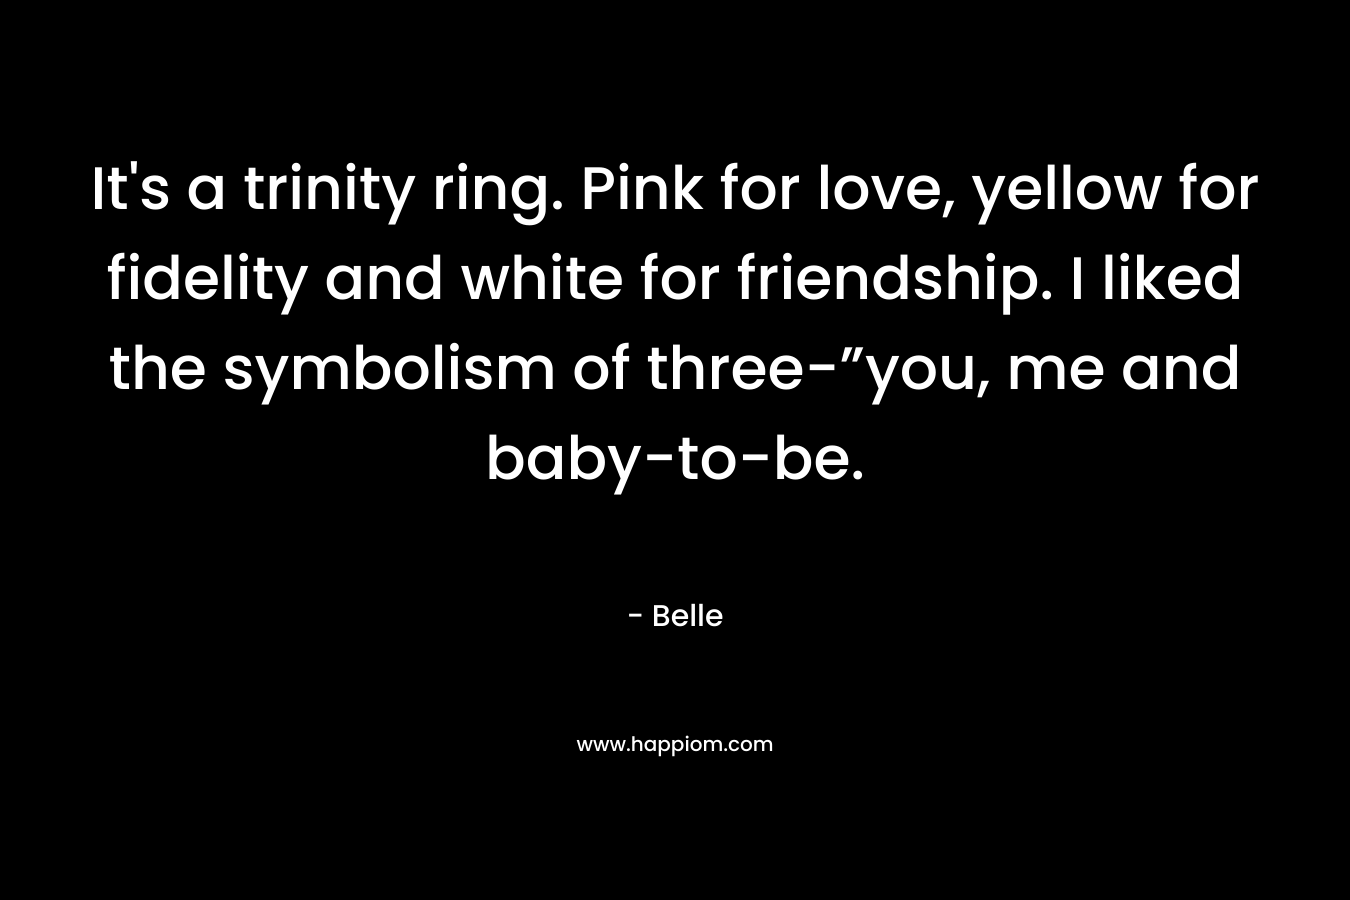 It's a trinity ring. Pink for love, yellow for fidelity and white for friendship. I liked the symbolism of three-”you, me and baby-to-be.